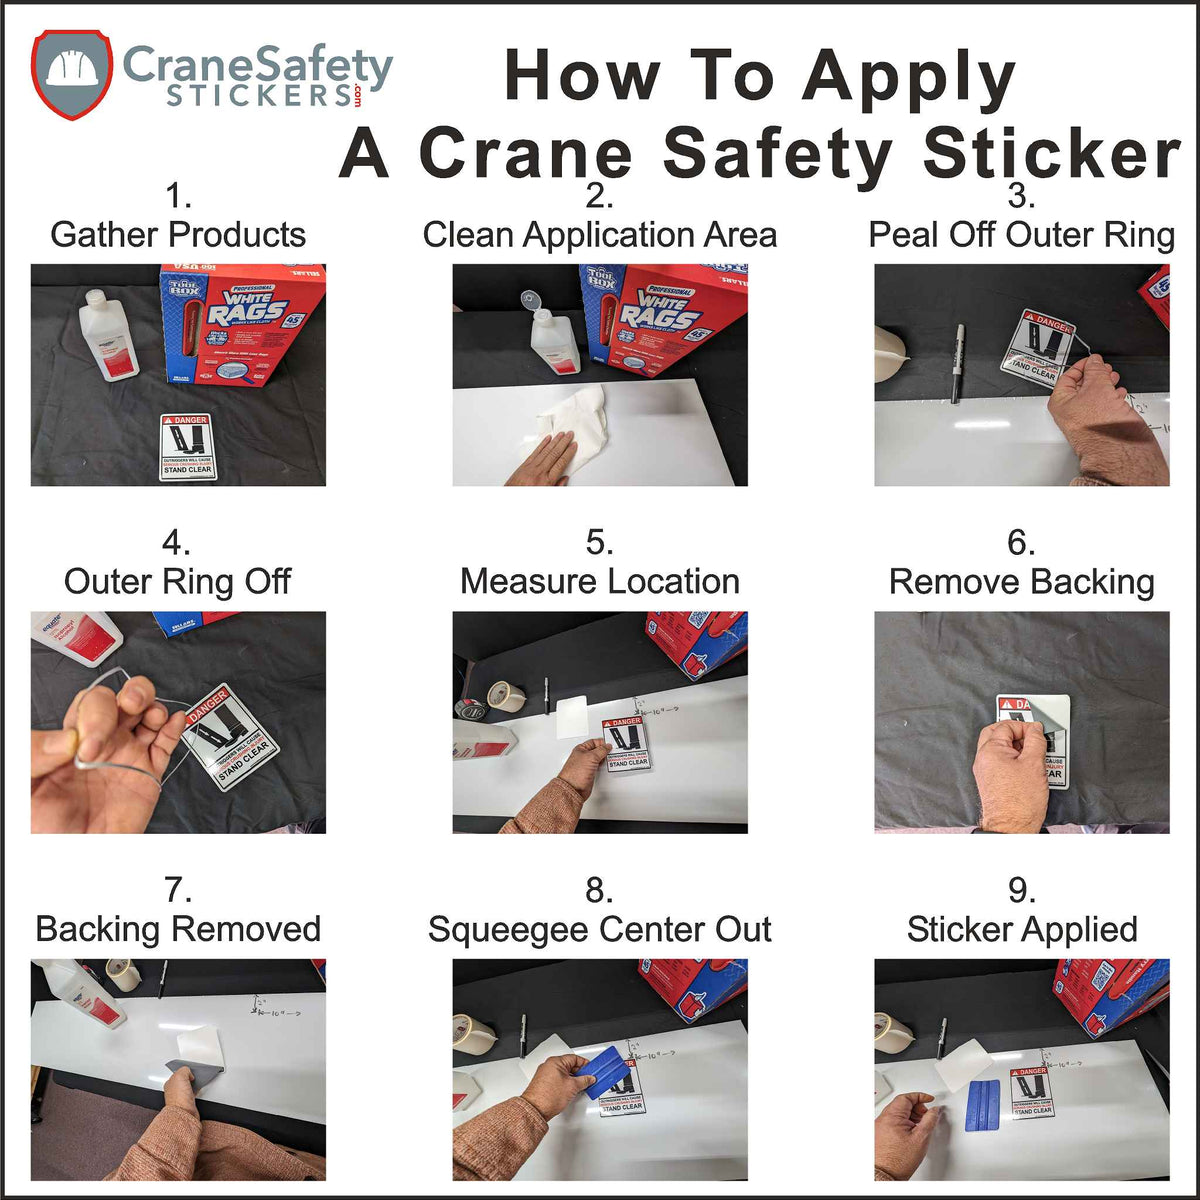 Directions on how to apply our Spanish printed crane safety sticker.